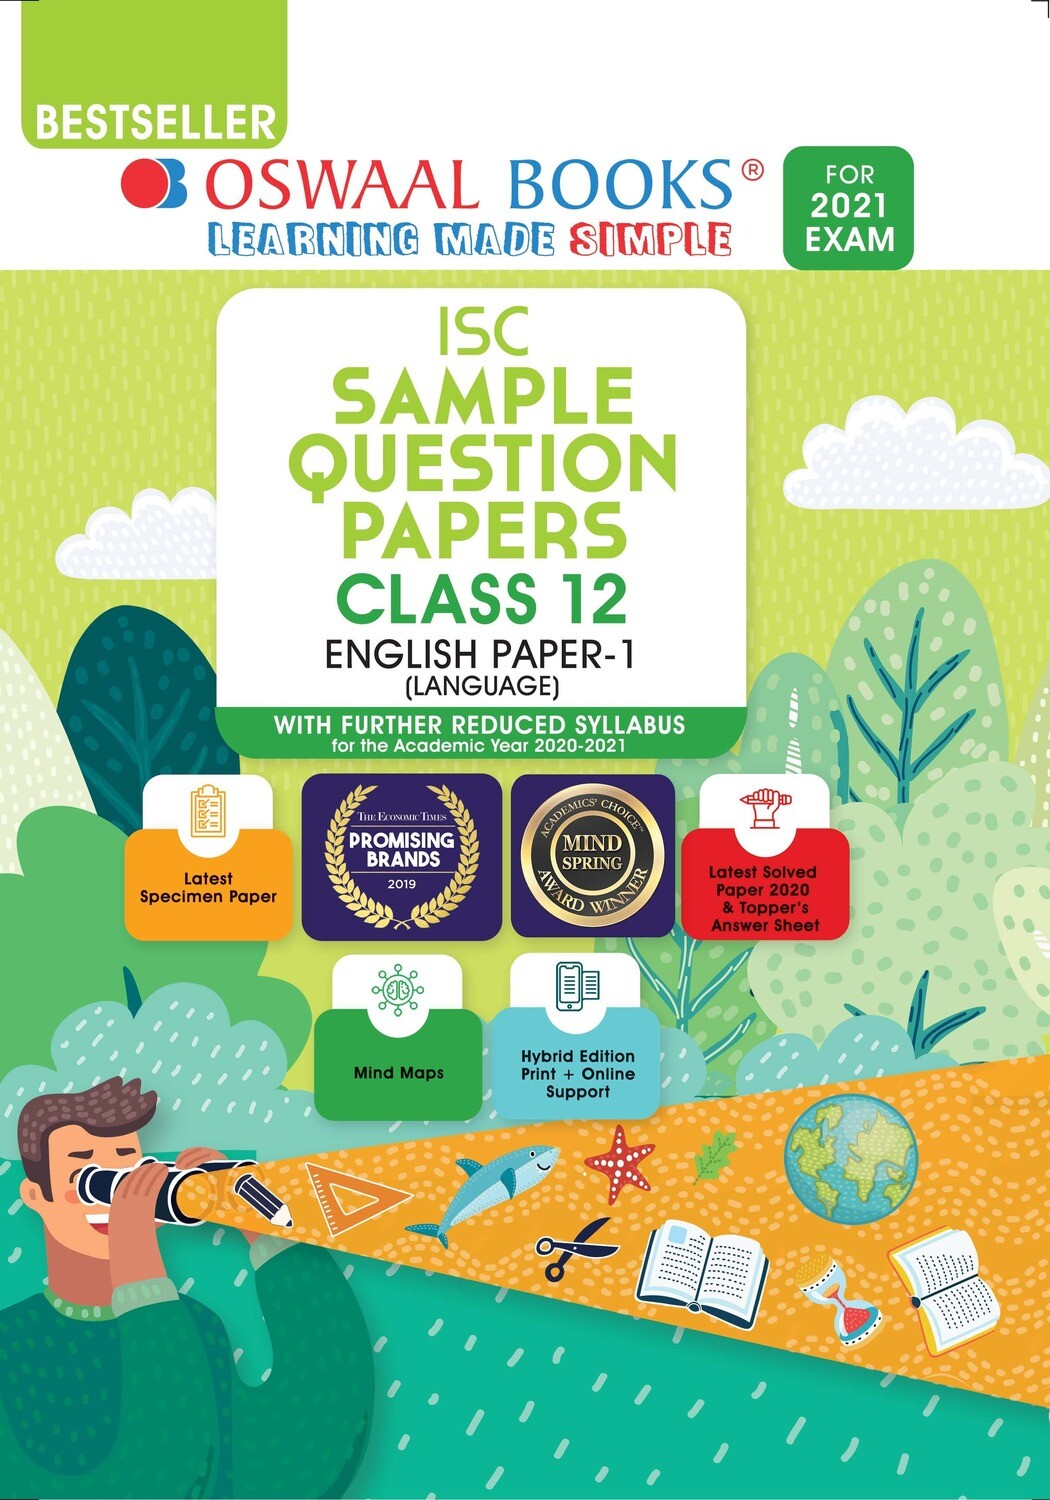 Buy e-book: Oswaal ISC Sample Question Papers Class 12 English Papers 1 Language (For 2021 Exam)